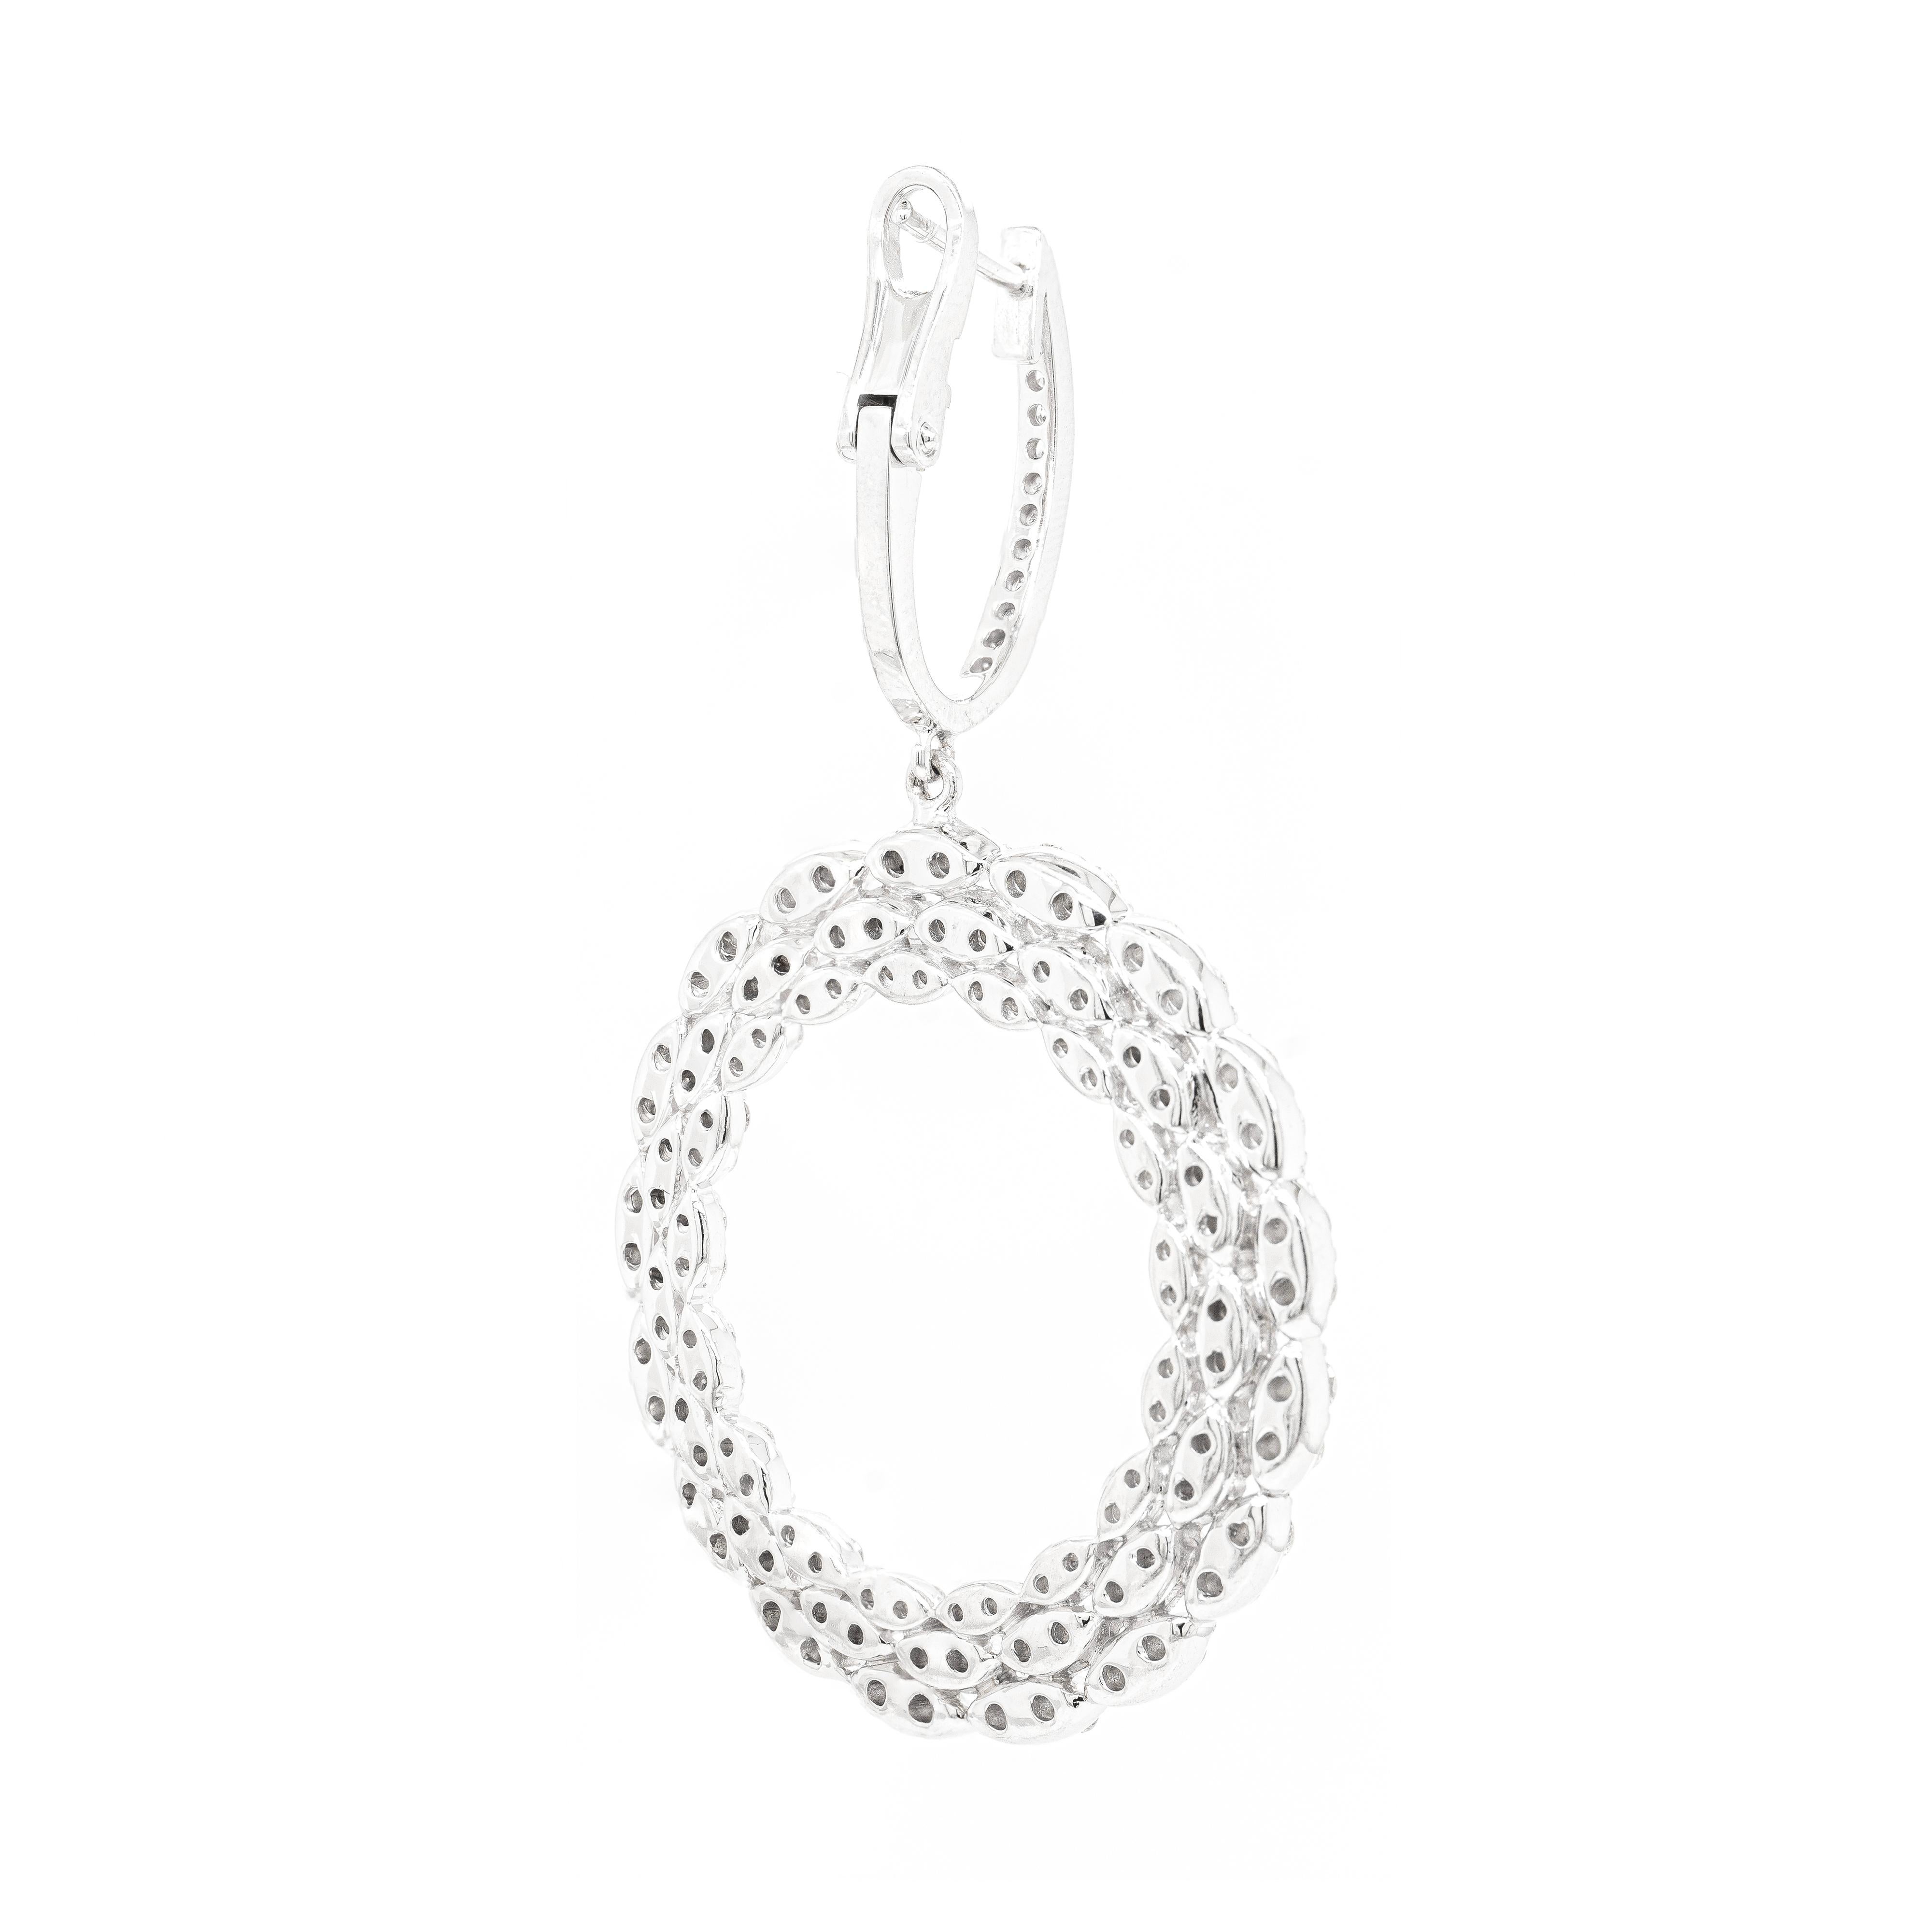 These spectacular dangle earrings feature an open-work front facing circular design, showcasing three rows of delicate marquise shaped 18 carat white gold mounts, each inlaid with two round brilliant cut diamonds. The large circle suspends from an